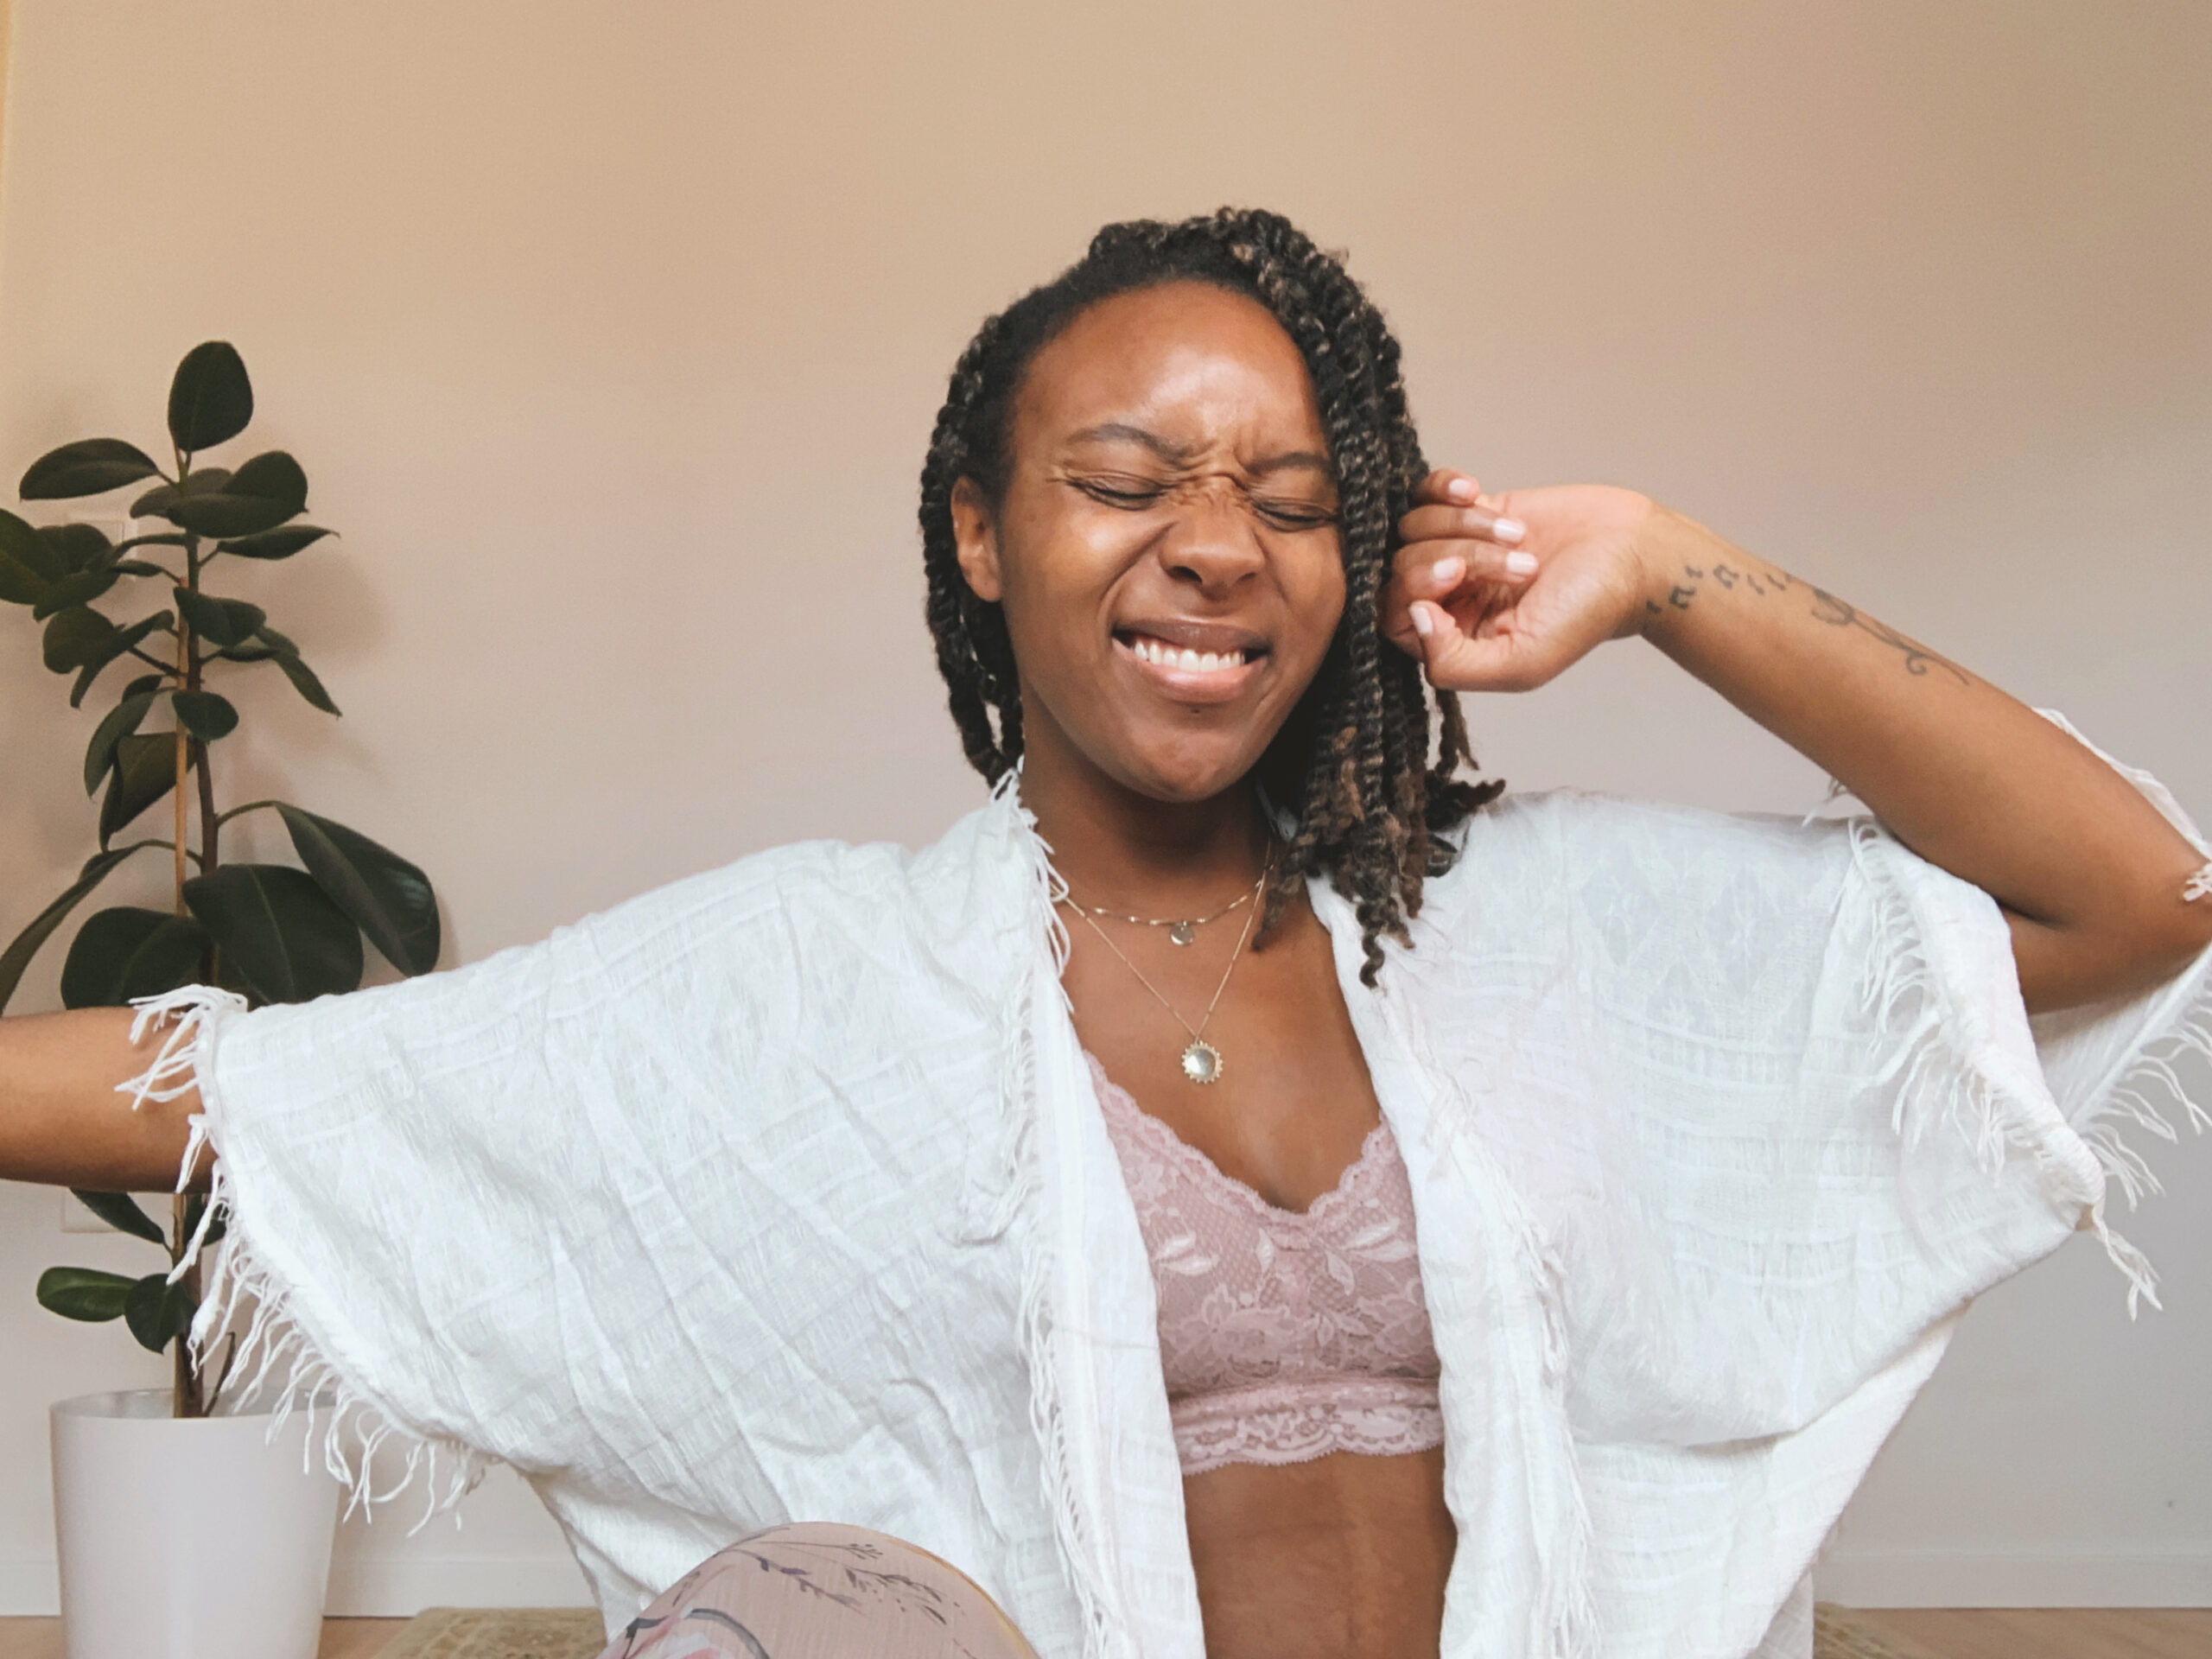 Natalie Martin, Menstrual cycle guru and black woman. Sits smiling with her eyes shut and arms outstretched She wears a white oversized shirt and bralette.